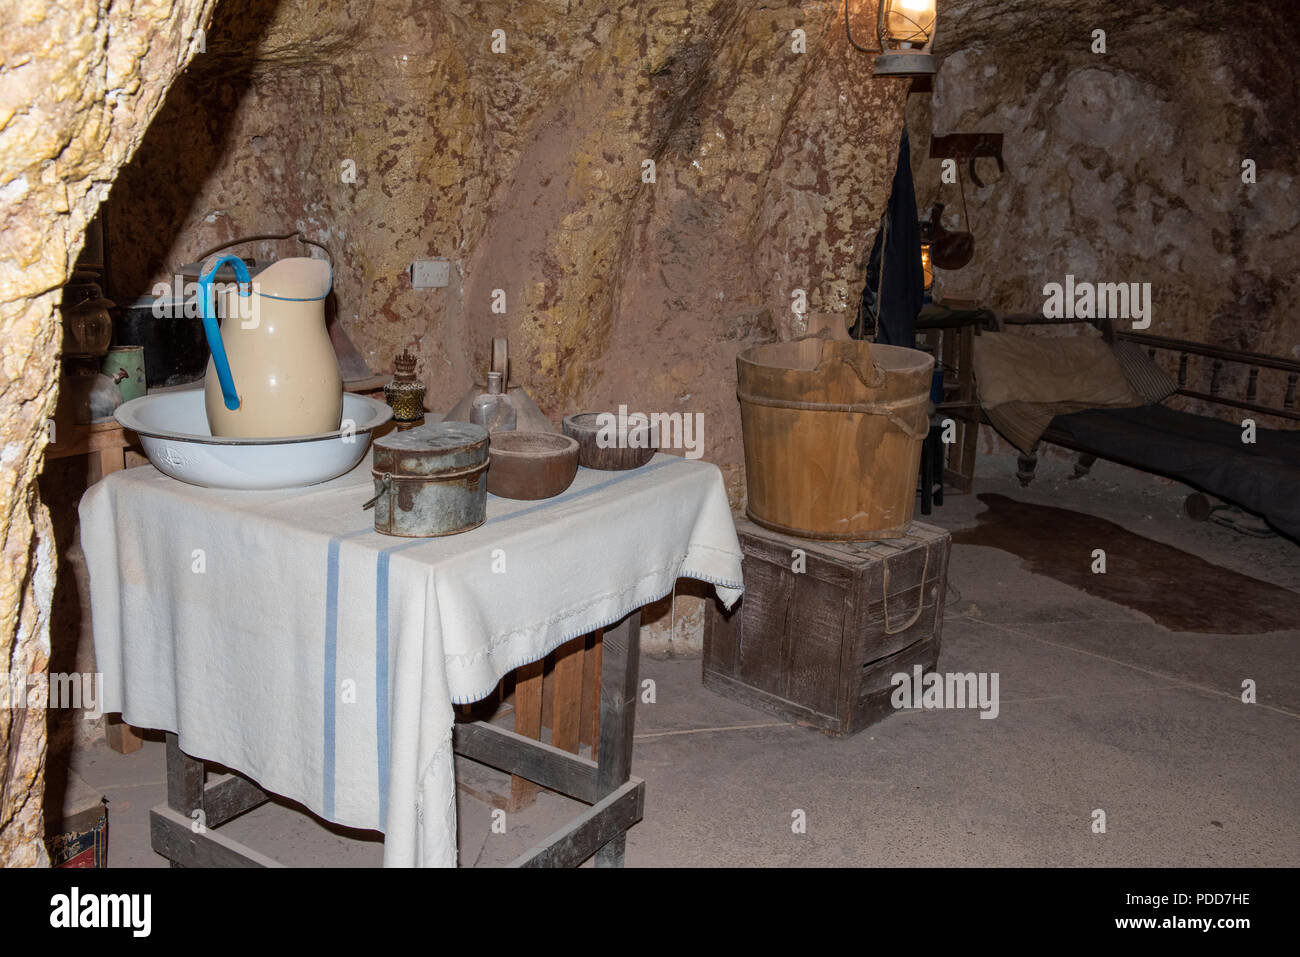 Australia, South Australia, Coober Pedy. Home to one of the richest opal fields in the world. Umoona Opal Mine & Museum. Typical underground home. Stock Photo